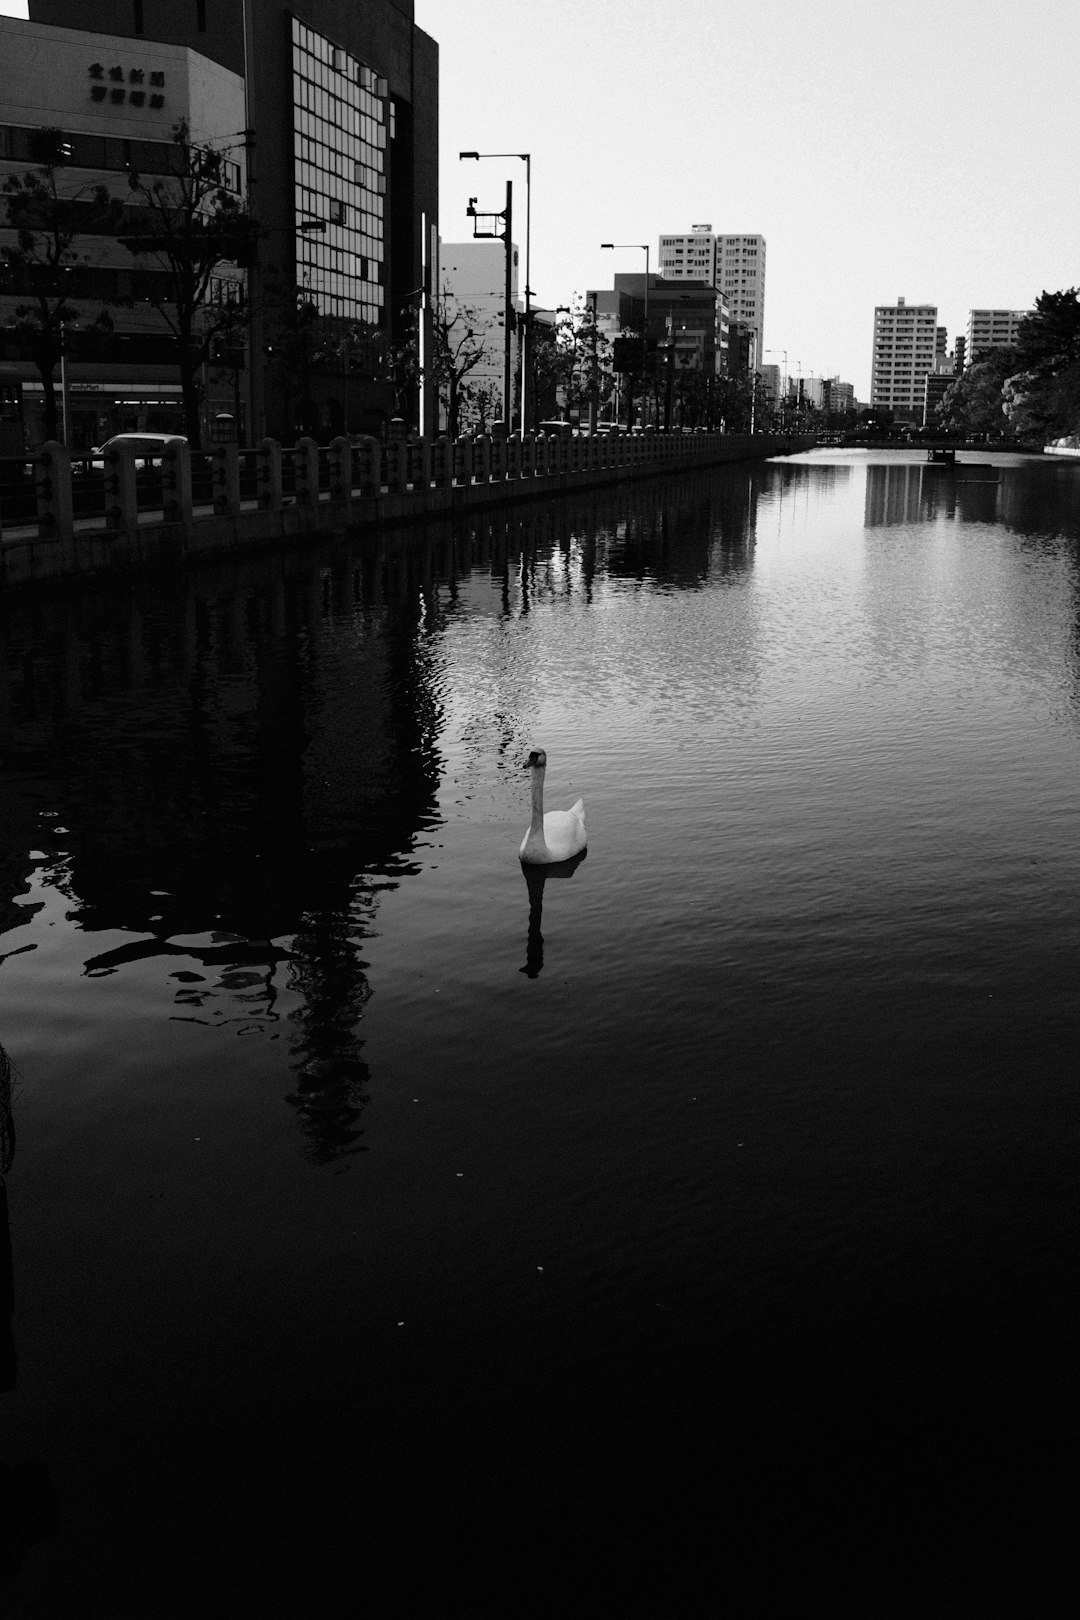 white swan on water near building during daytime